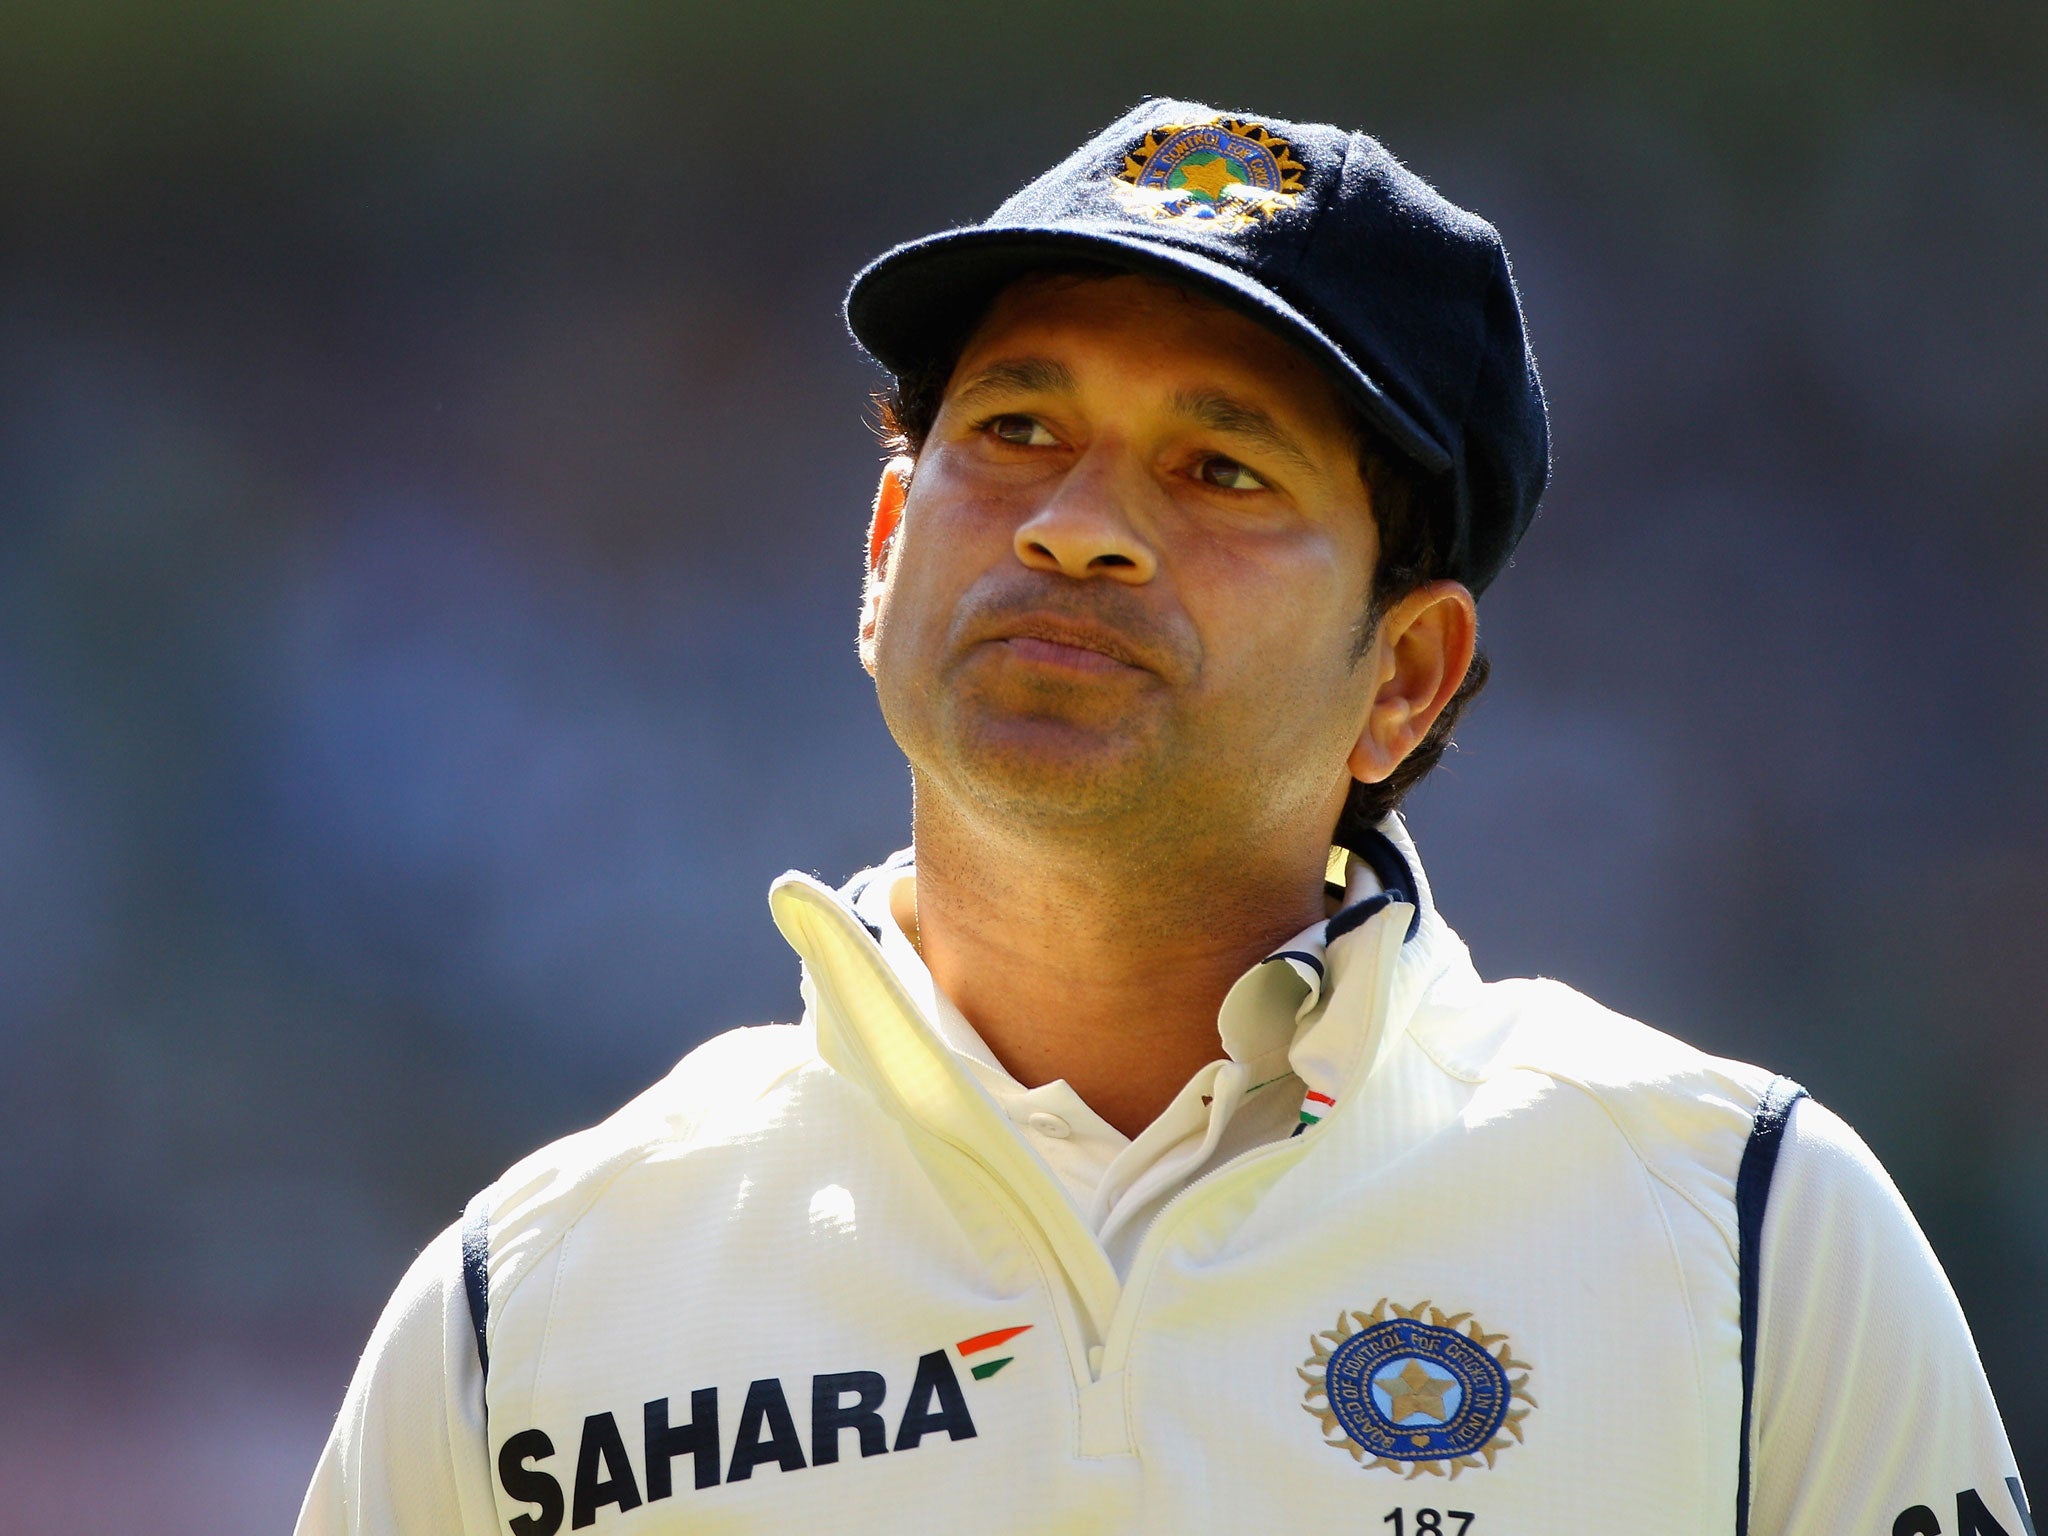 Sachin Tendulkar's dismissal for 10 in the first innings of his penultimate Test can only have helped DRS's entire case